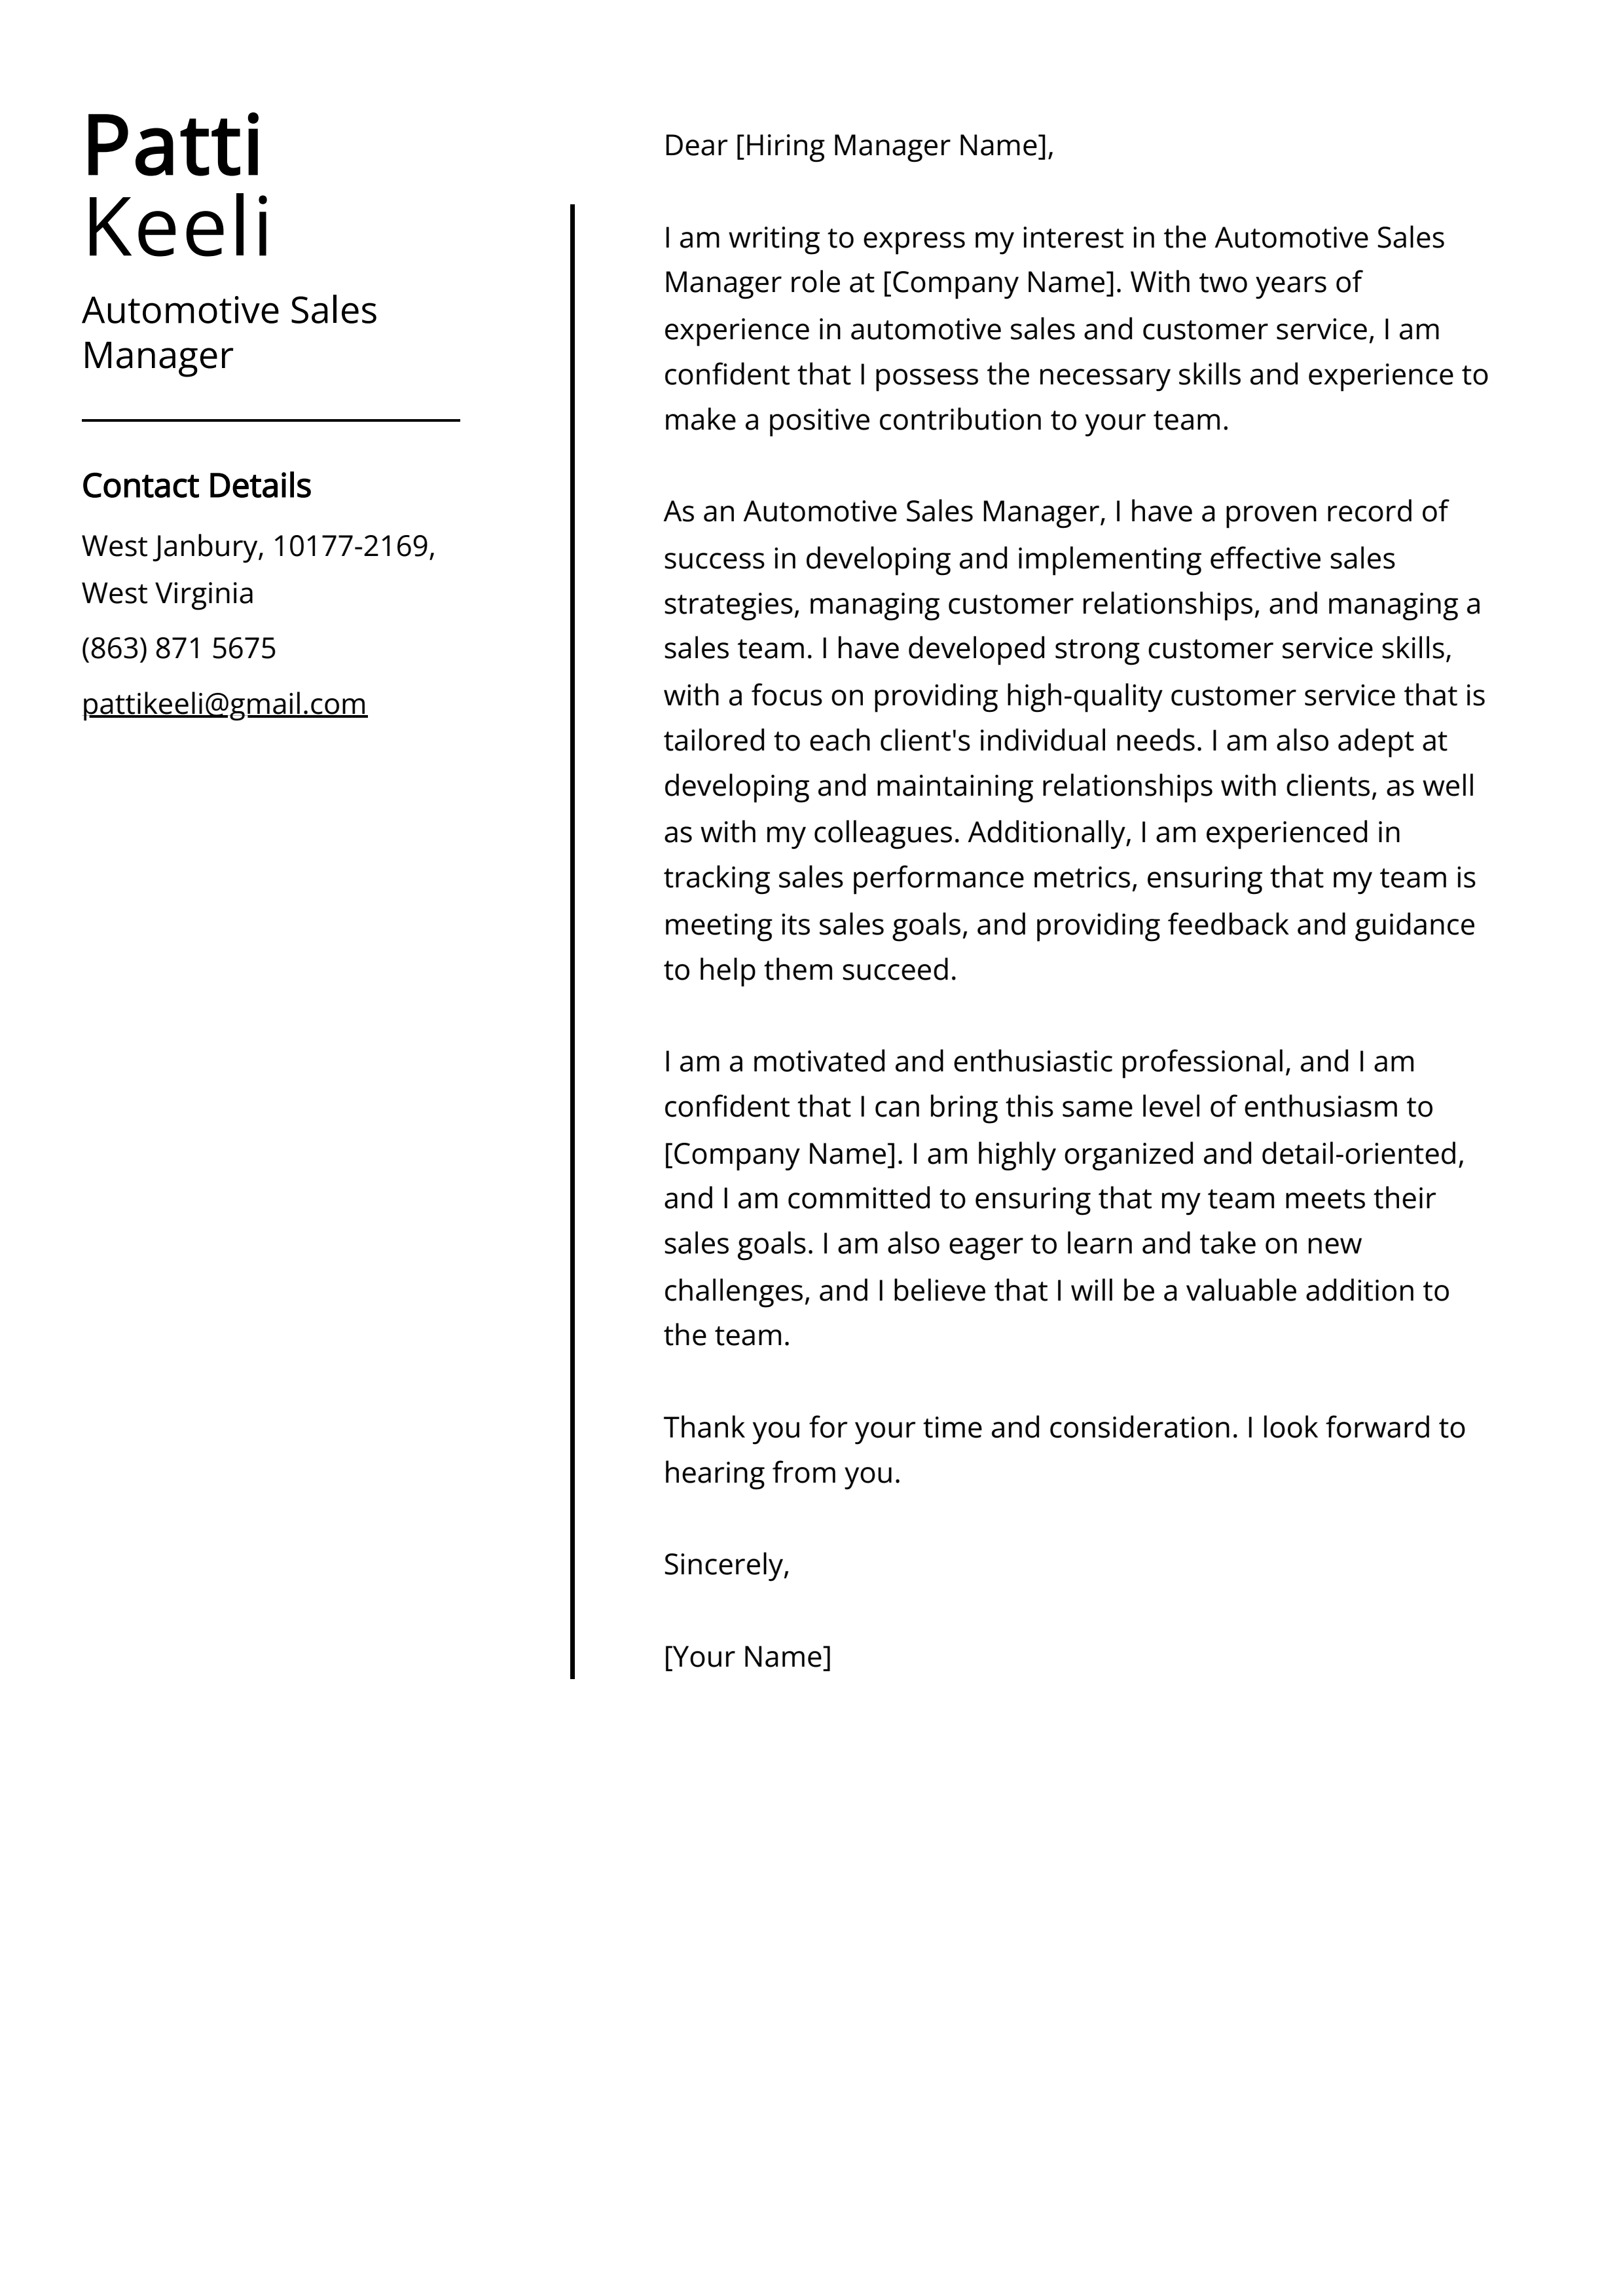 Automotive Sales Manager Cover Letter Example